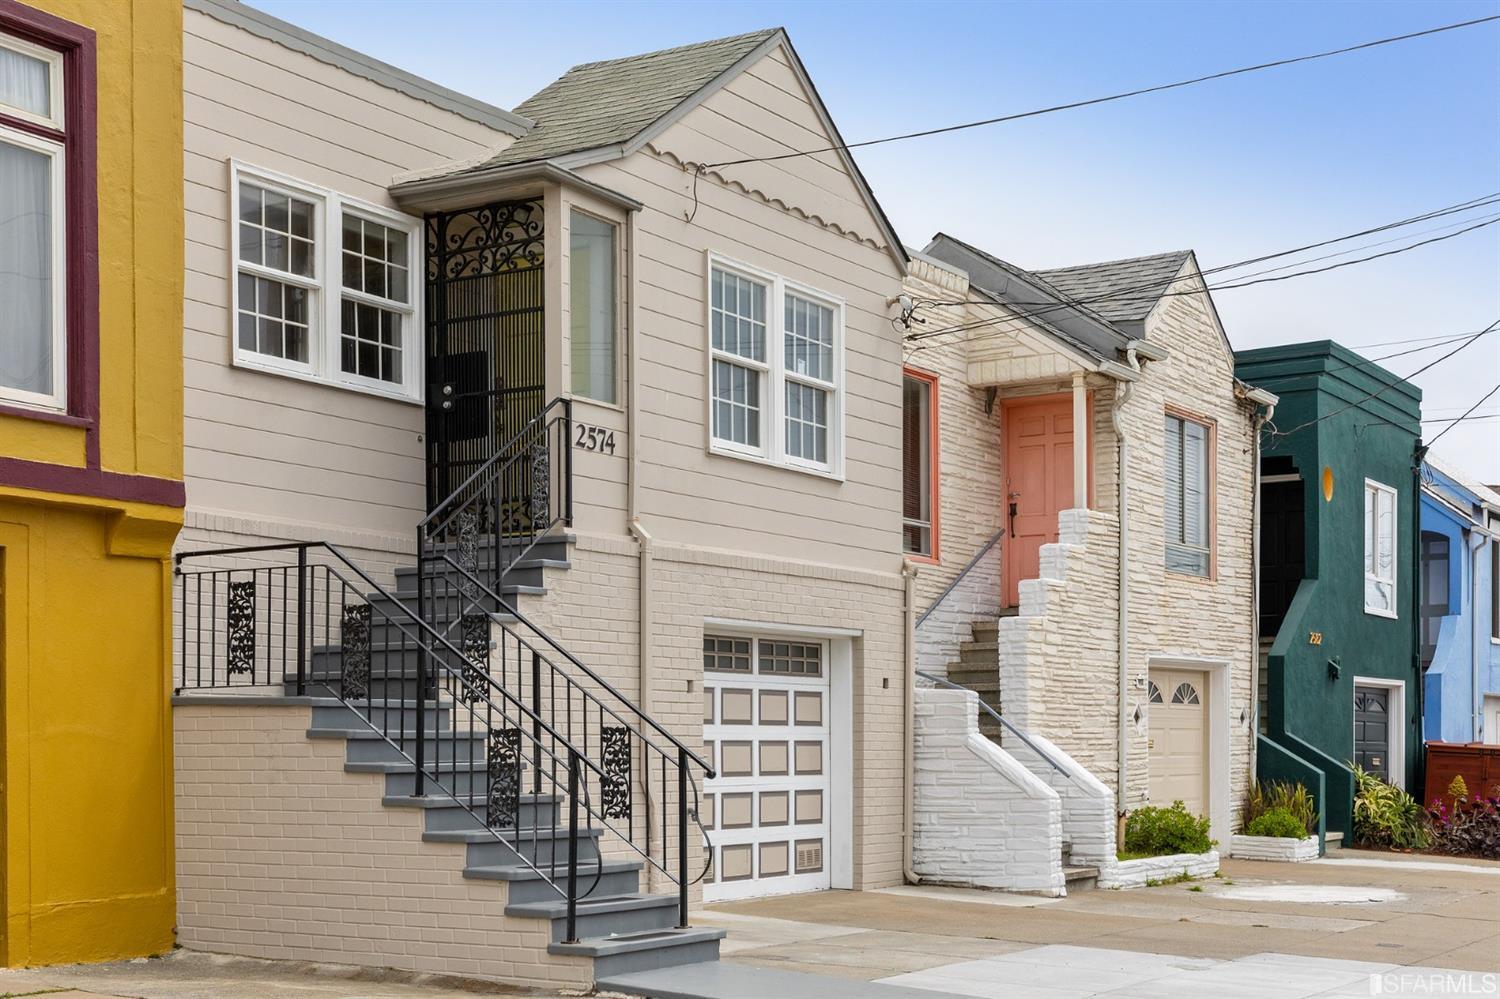 What Should a “Starter Home” Cost In SF?